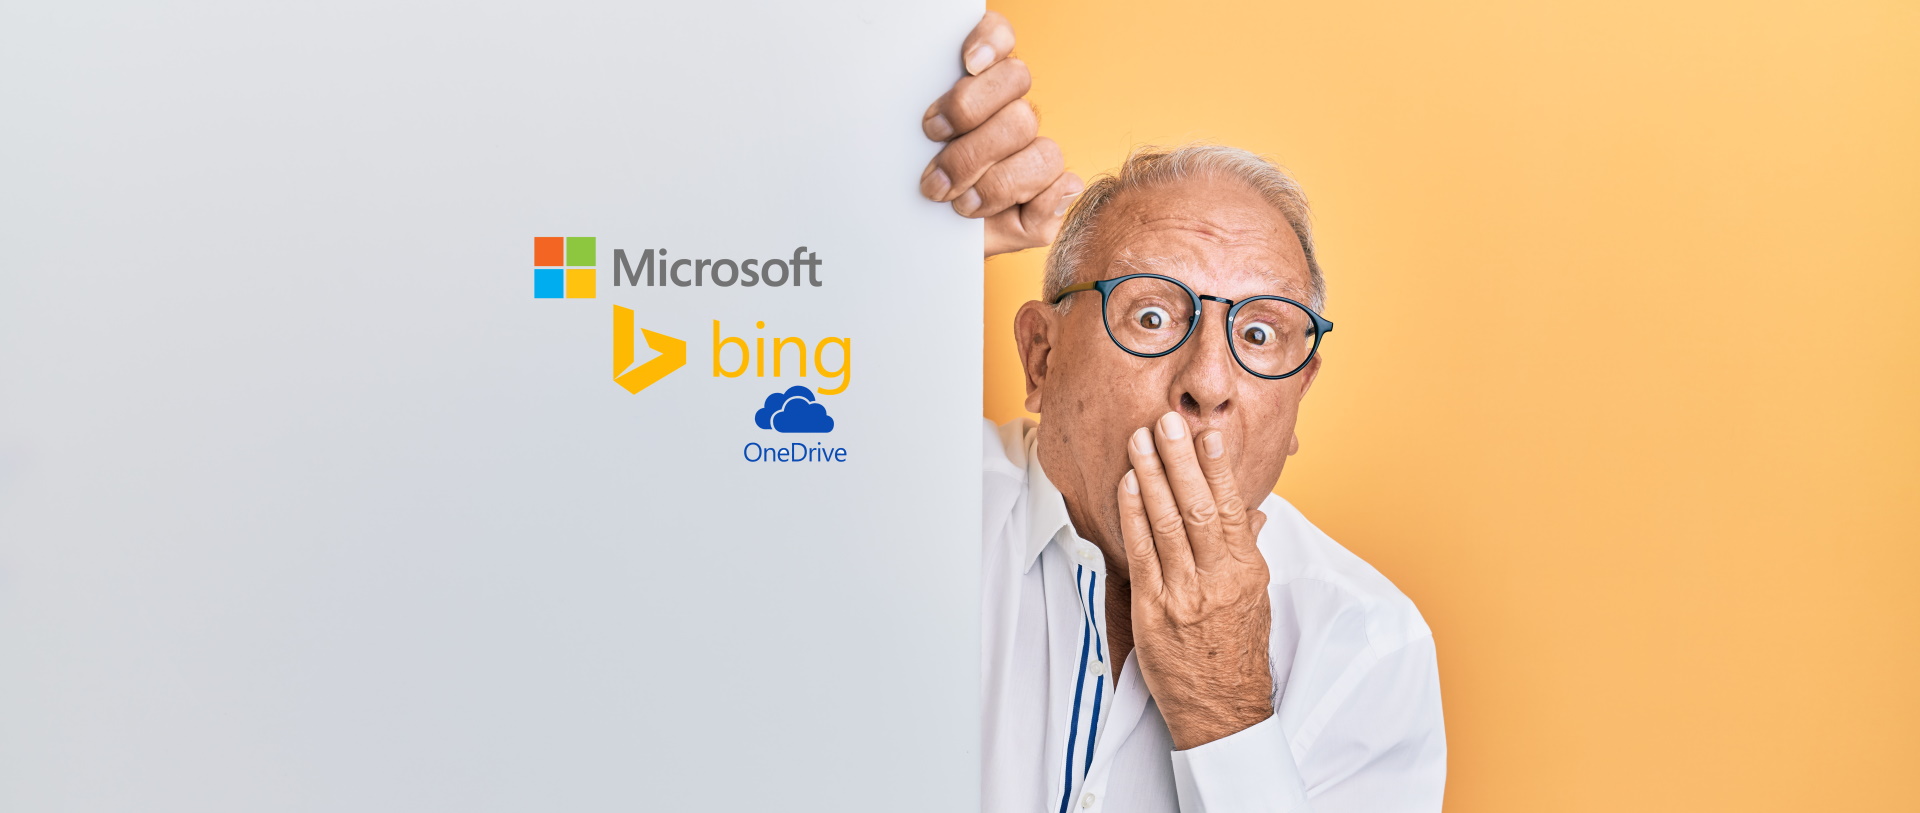 OneDrive files appear in Bing search results